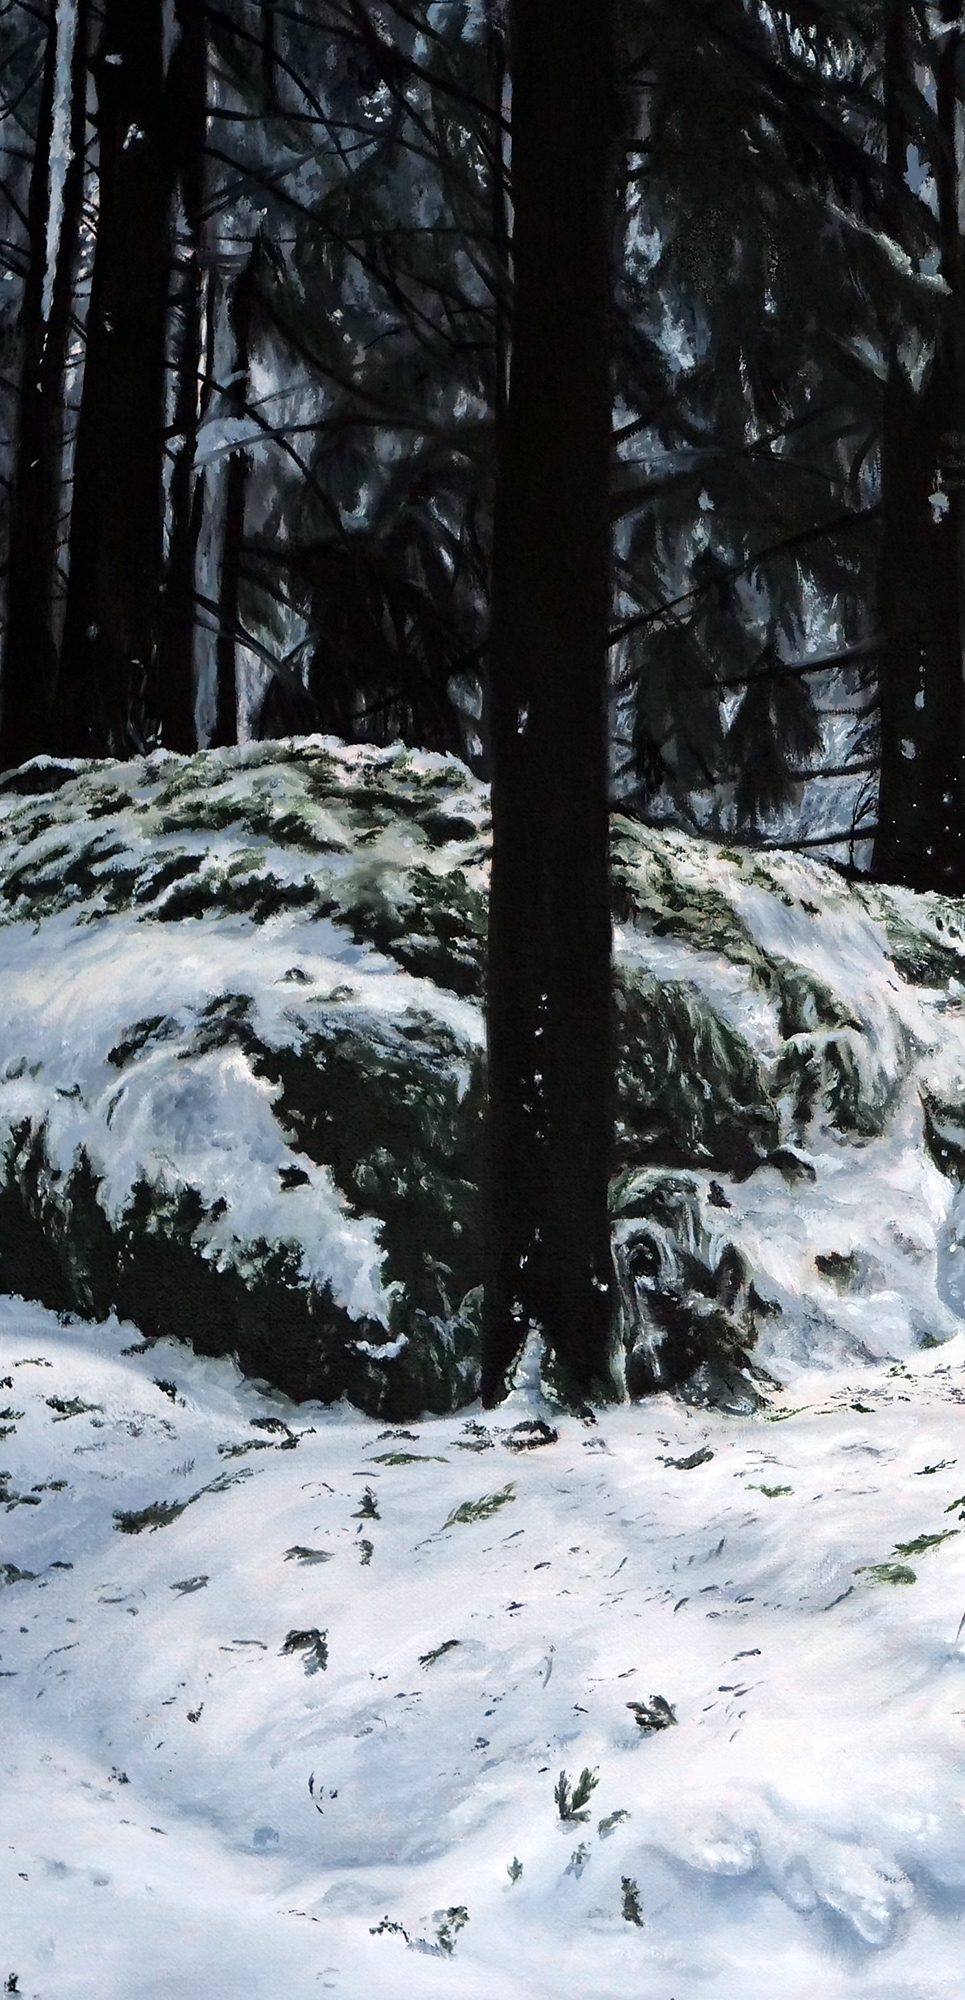 detail of snow bank and forest From Within by Christina Ridgeway